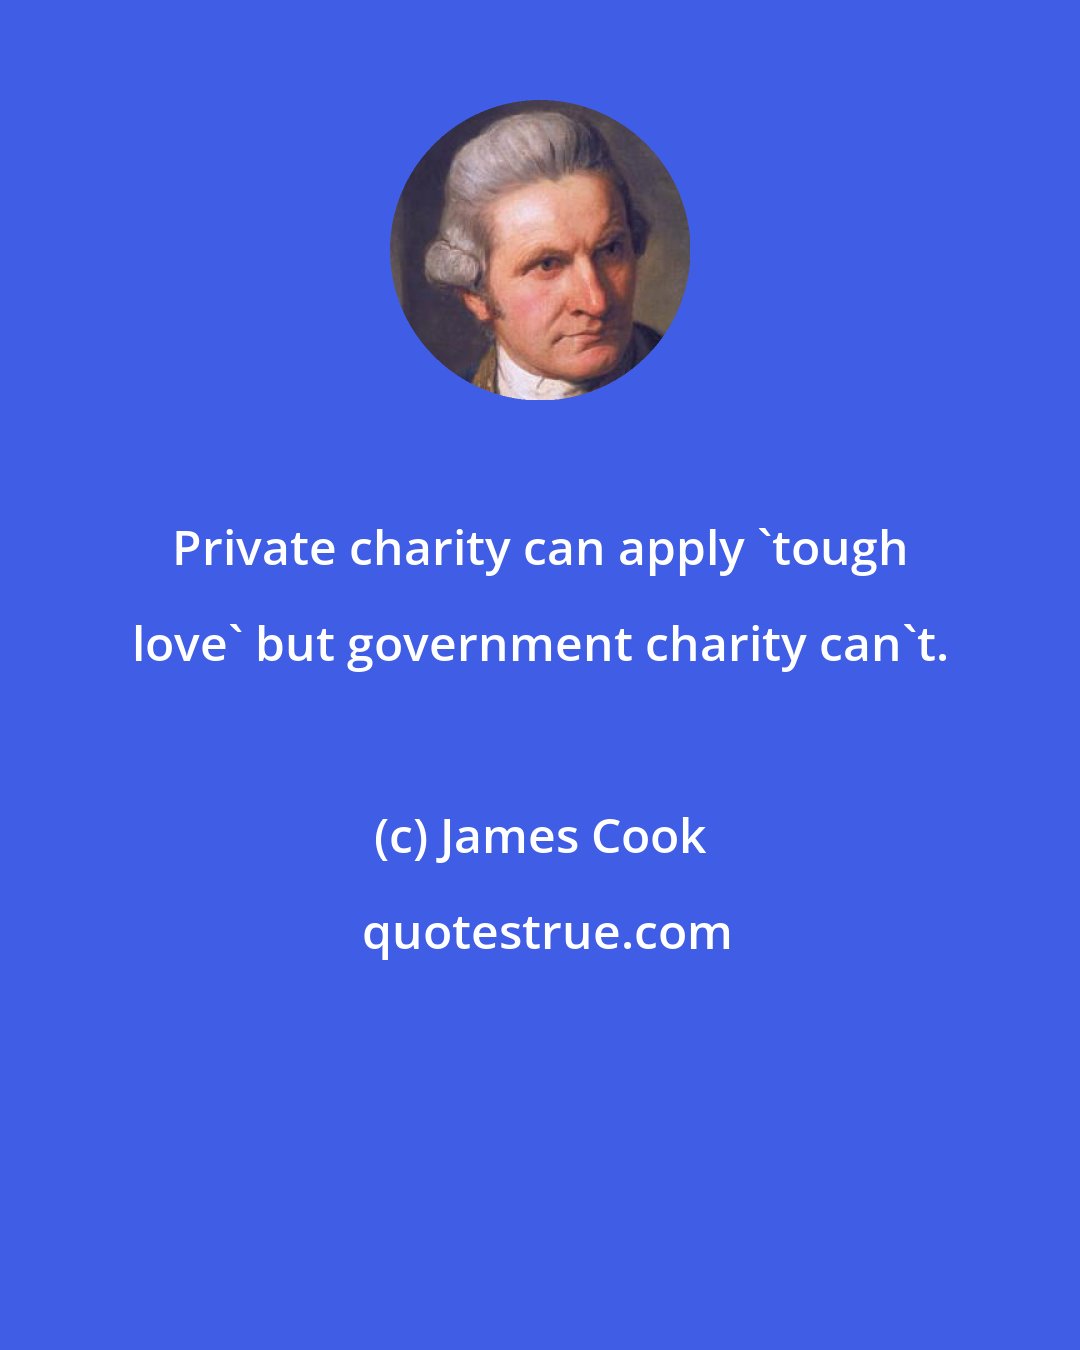 James Cook: Private charity can apply 'tough love' but government charity can't.